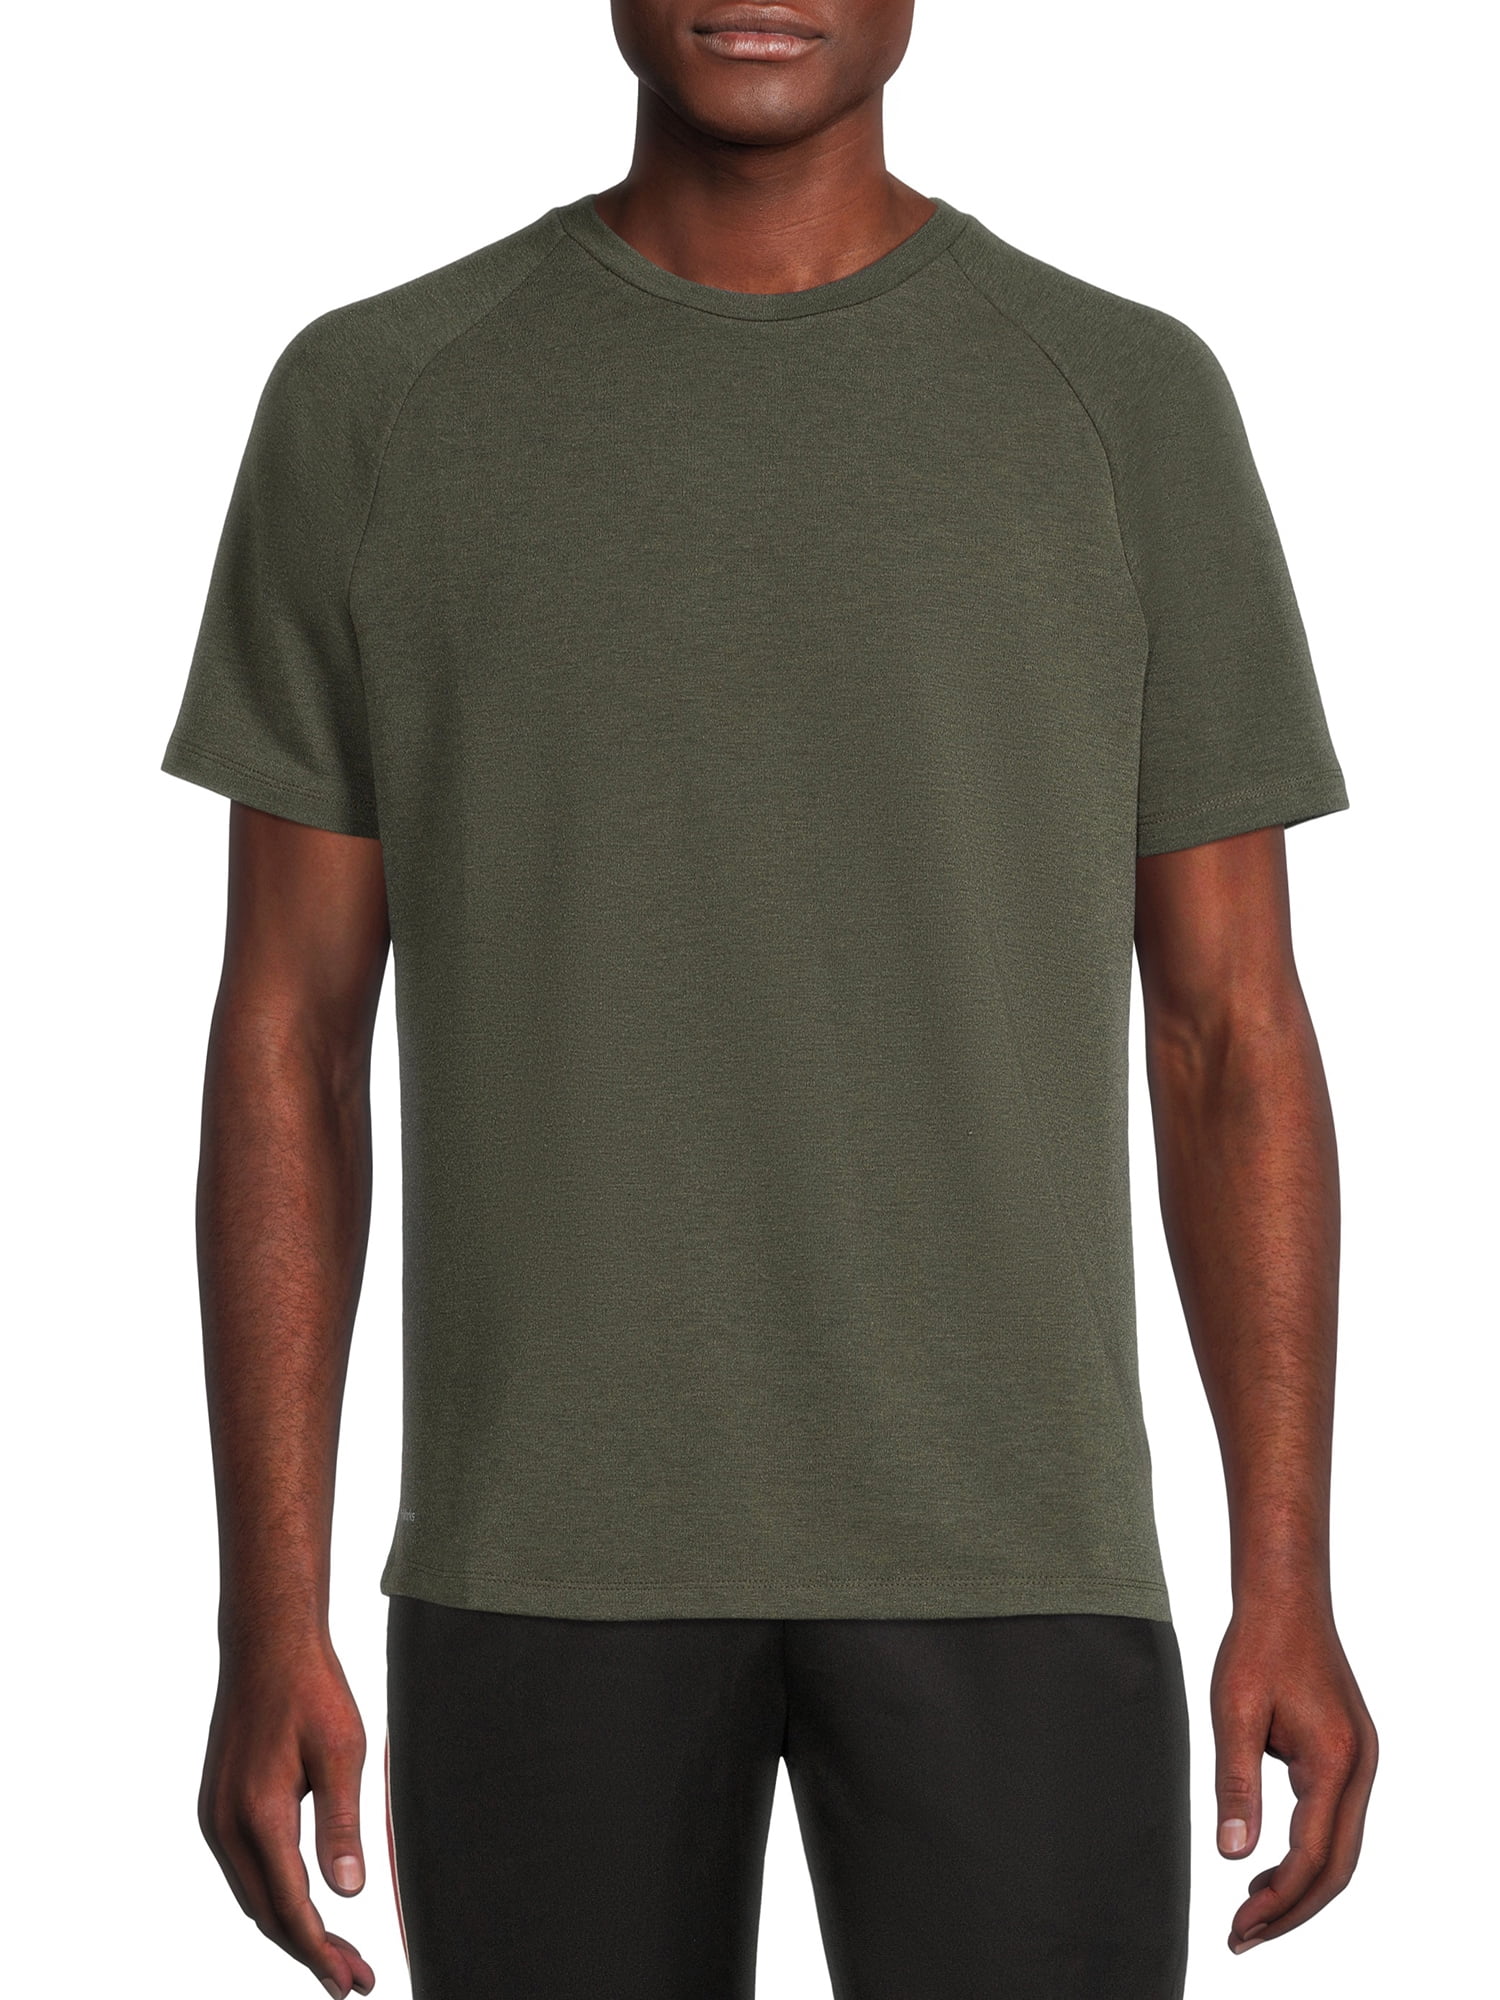 Athletic Works Men's and Big Men's Comfort T-Shirt with Short Sleeves ...